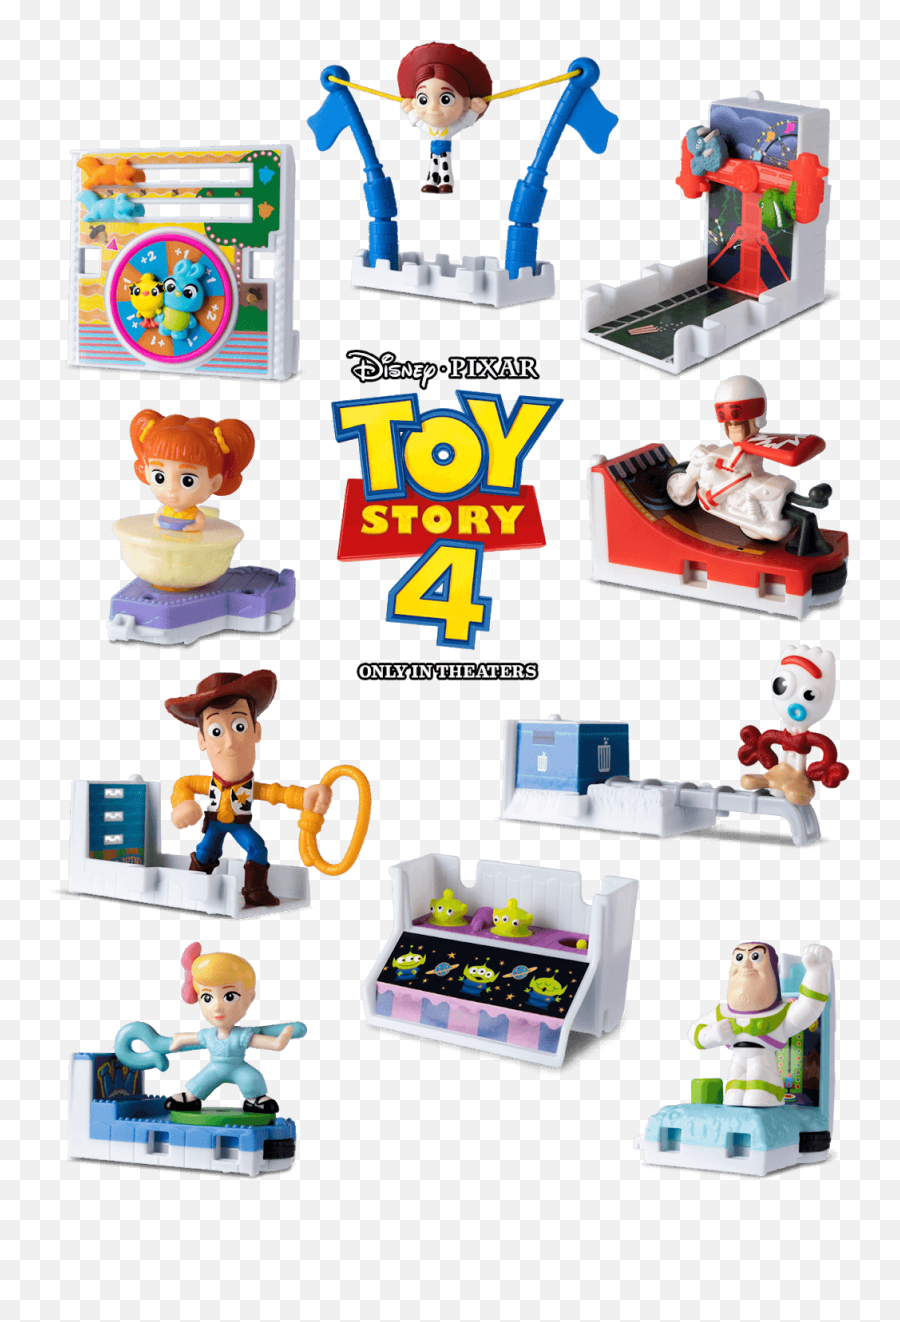 Disney At Heart Toy Story 4 Toys Are In Happy Meals At - Toy Story 3 Emoji,Toy Story 4 Logo